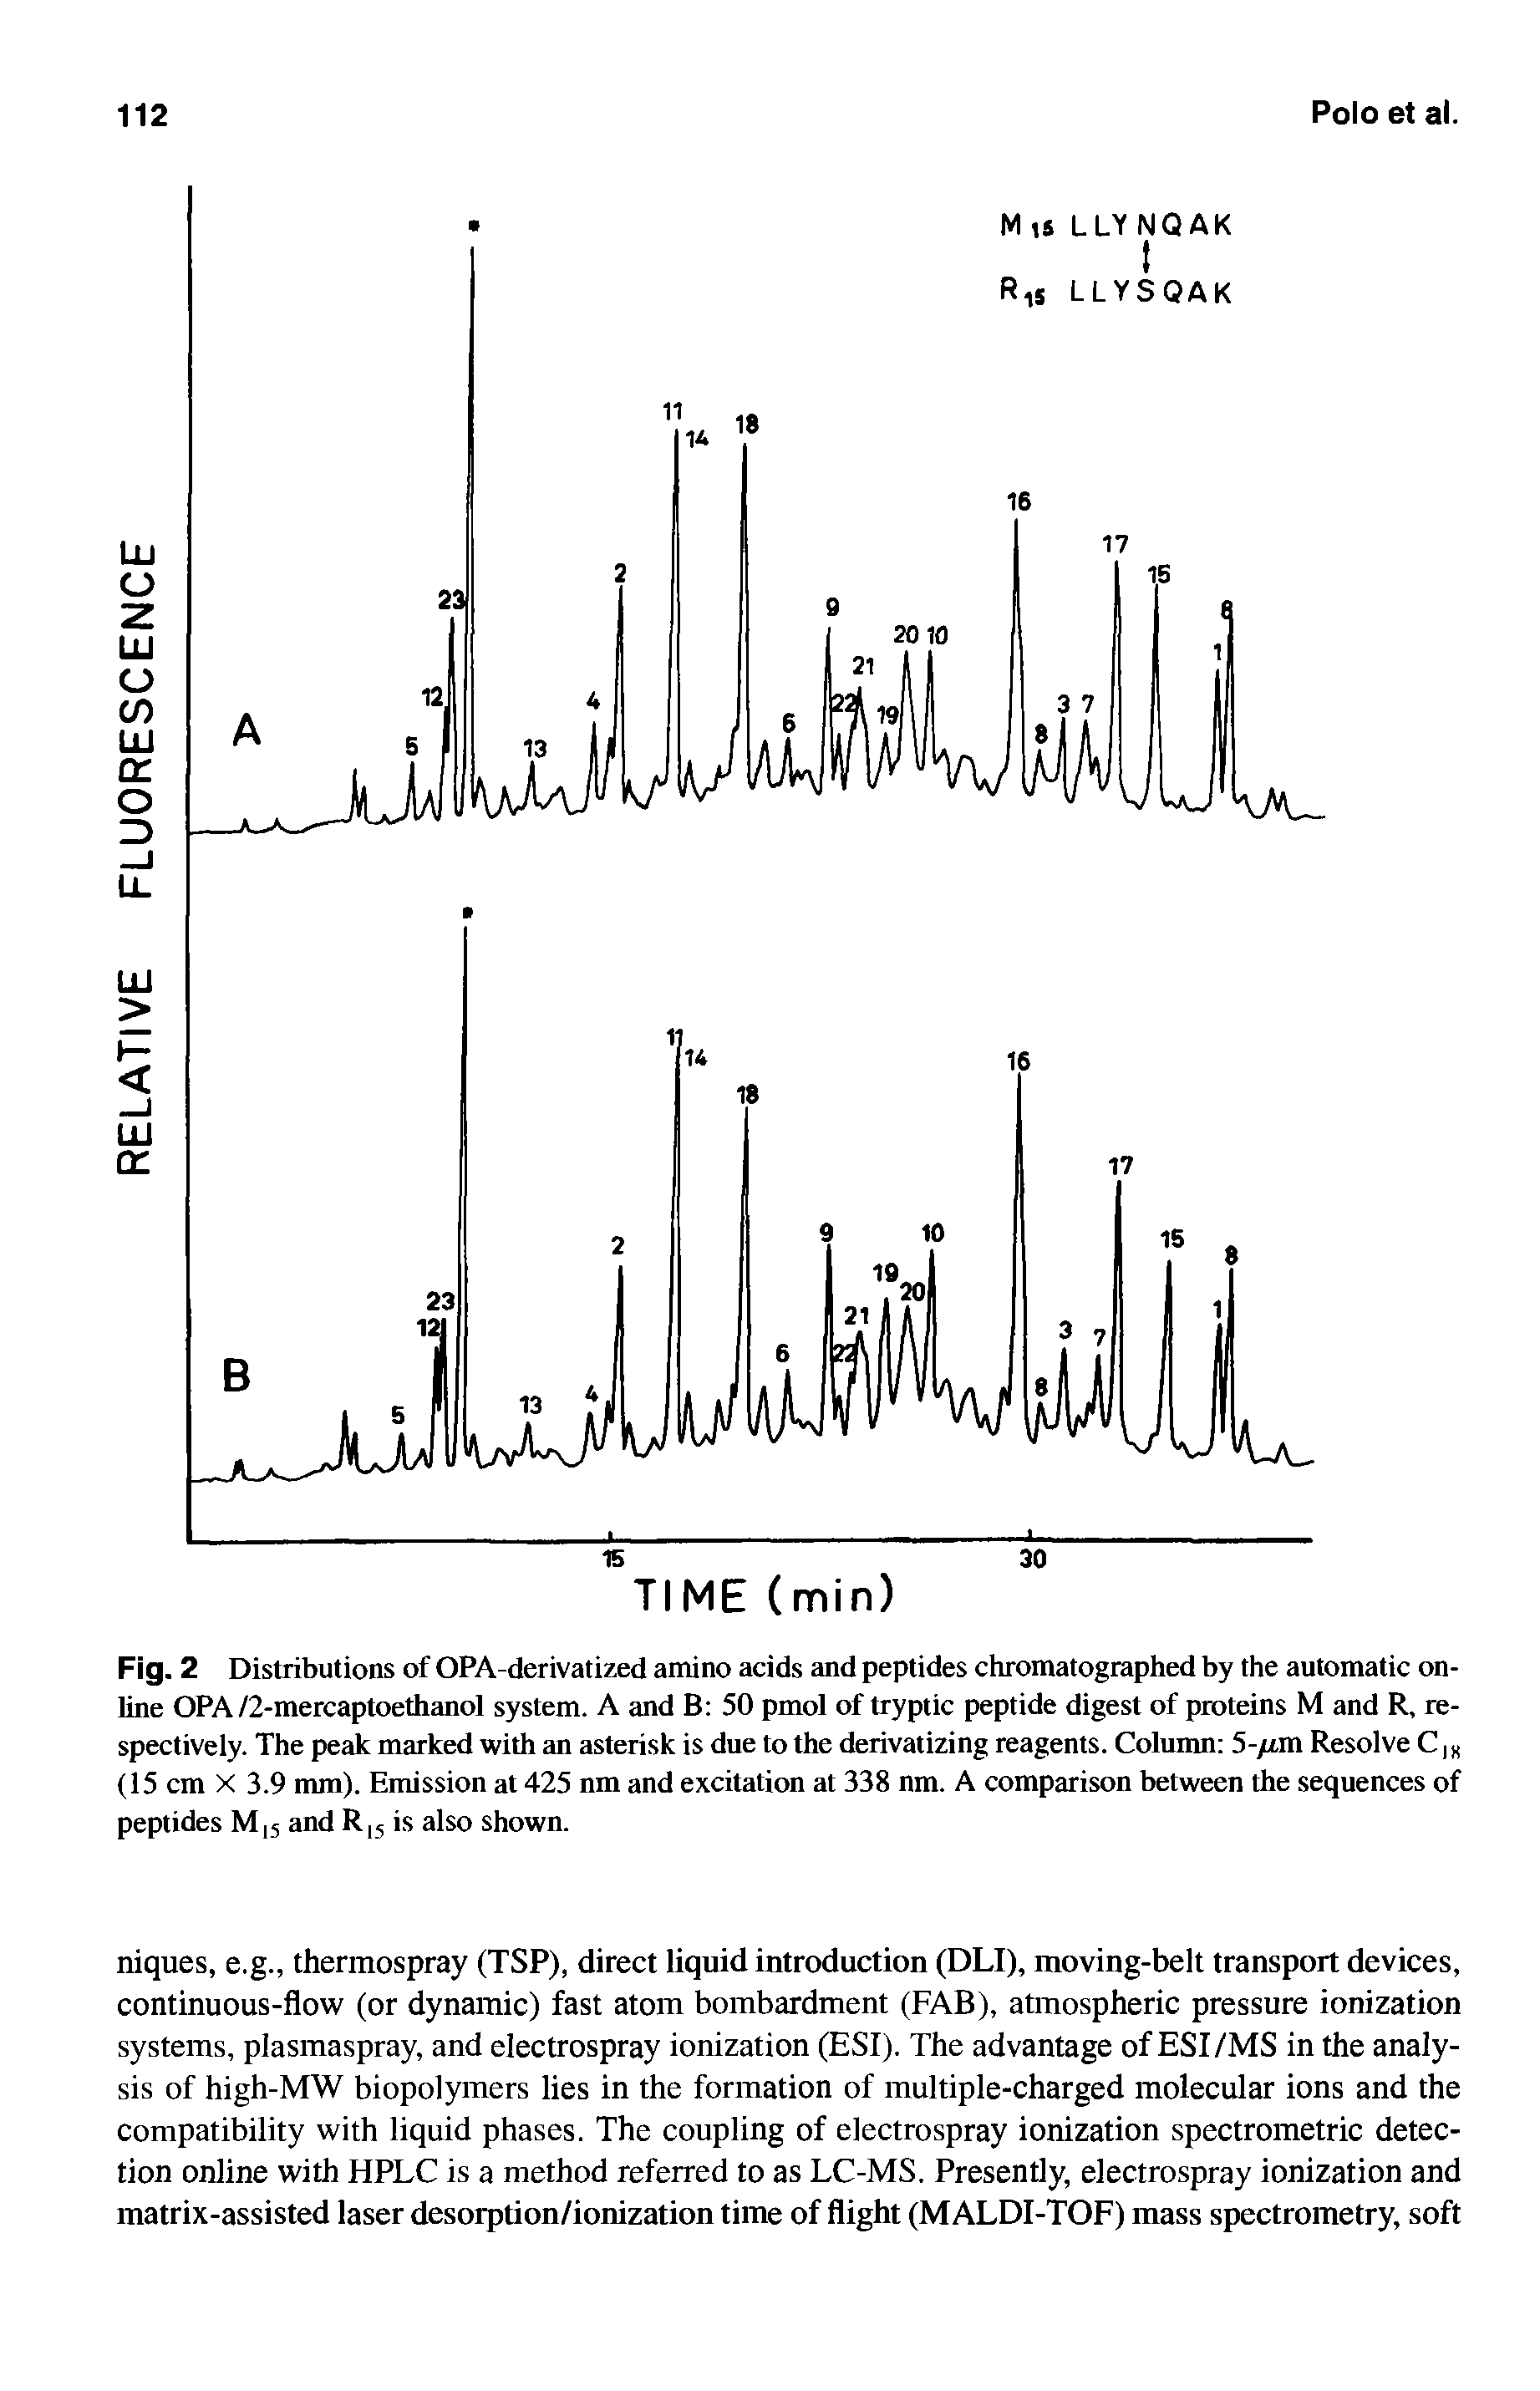 Fig. 2 Distributions of OPA-derivatized amino acids and peptides chromatographed by the automatic online OPA/2-mercaptoethanol system. A and B 50 pmol of tryptic peptide digest of proteins M and R, respectively. The peak marked with an asterisk is due to the derivatizing reagents. Column 5-/zm Resolve C, (15 cm X 3.9 mm). Emission at 425 nm and excitation at 338 nm. A comparison between the sequences of peptides M,5 and R,5 is also shown.